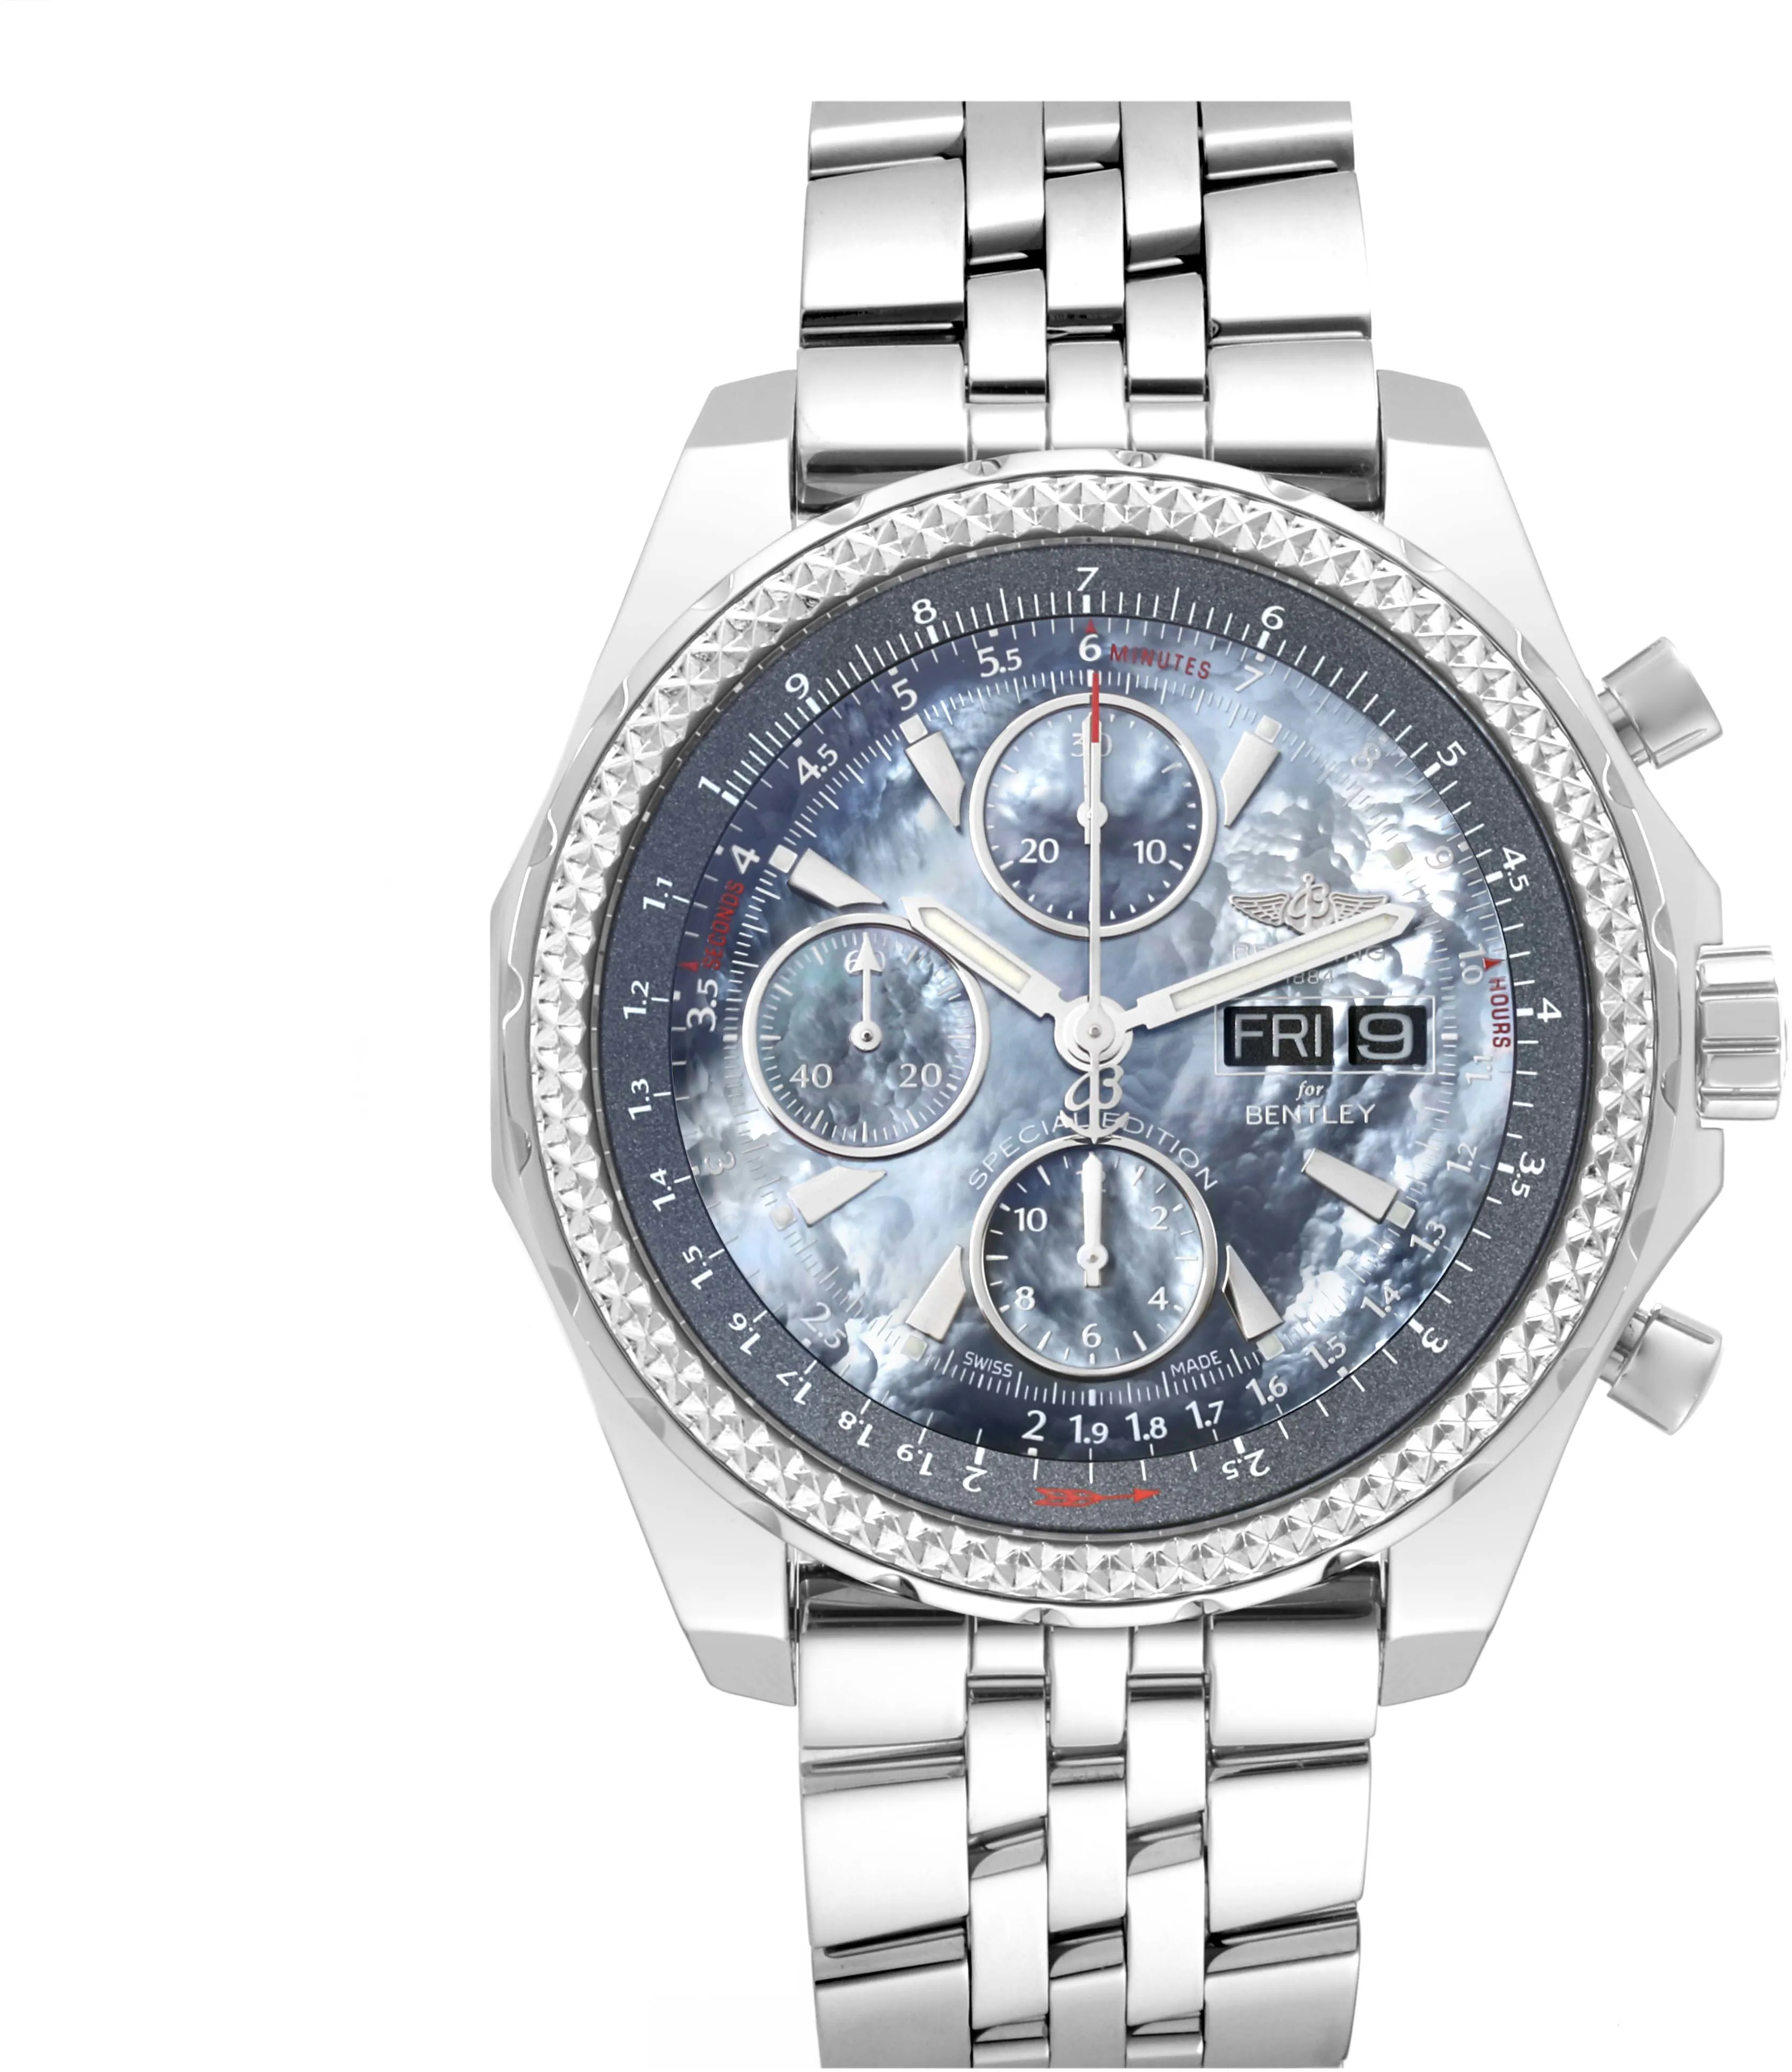 Breitling Bentley A13362 45mm Stainless steel Blue